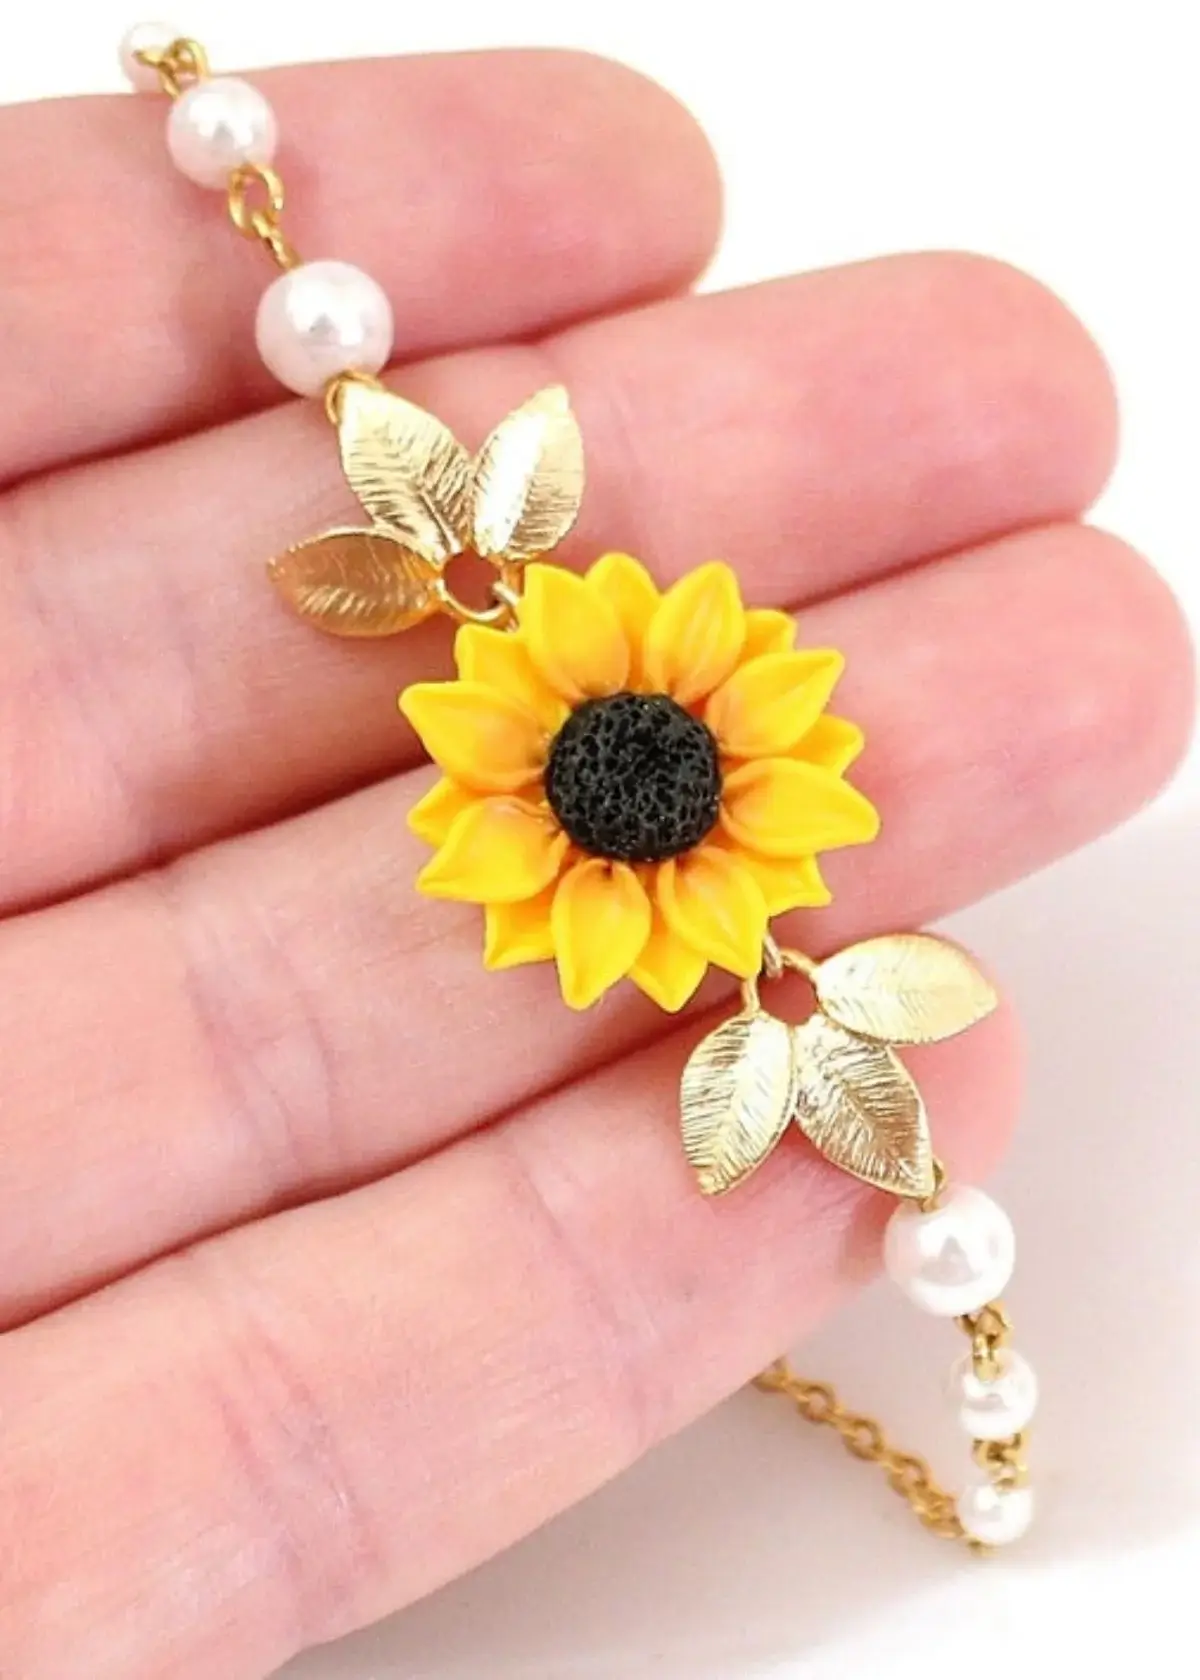 How to choose the right sunflower bracelet?